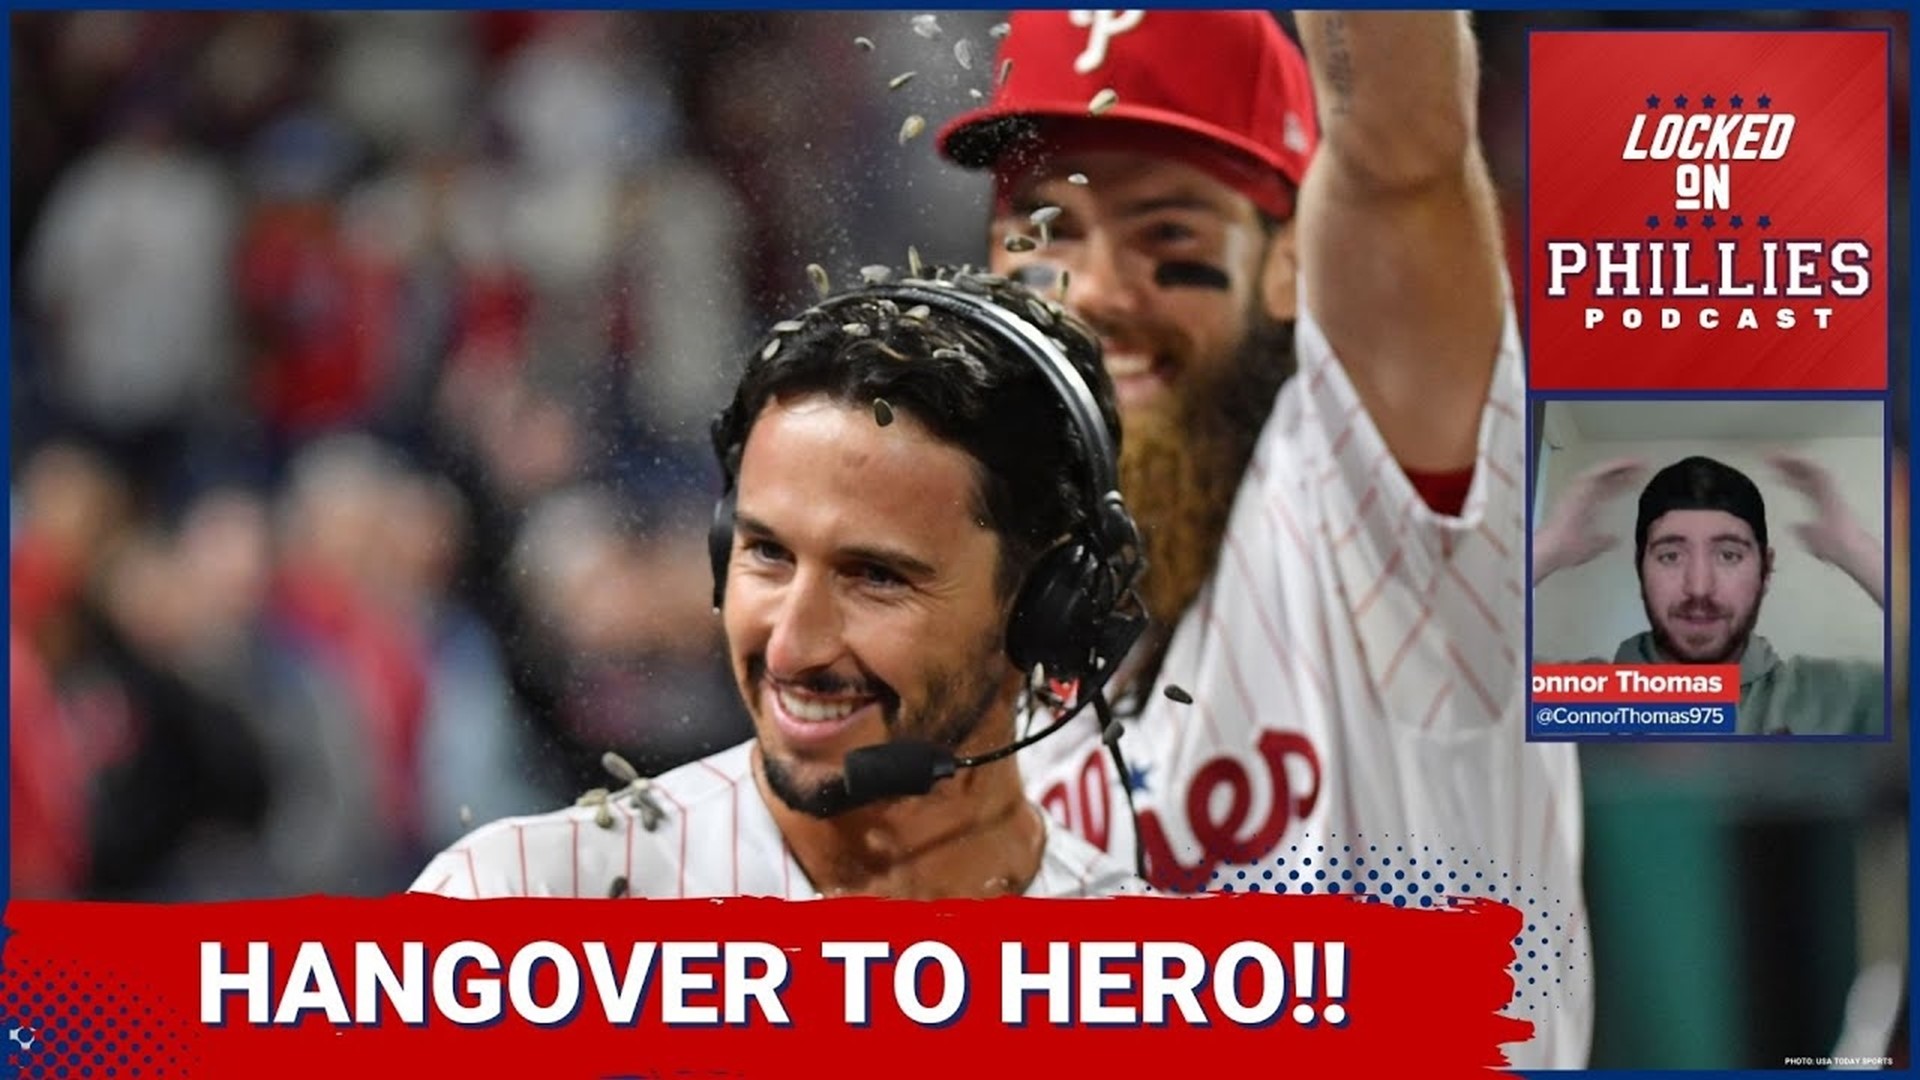 Kyle Schwarber homers, Bryce Harper ejected but Phillies fall to